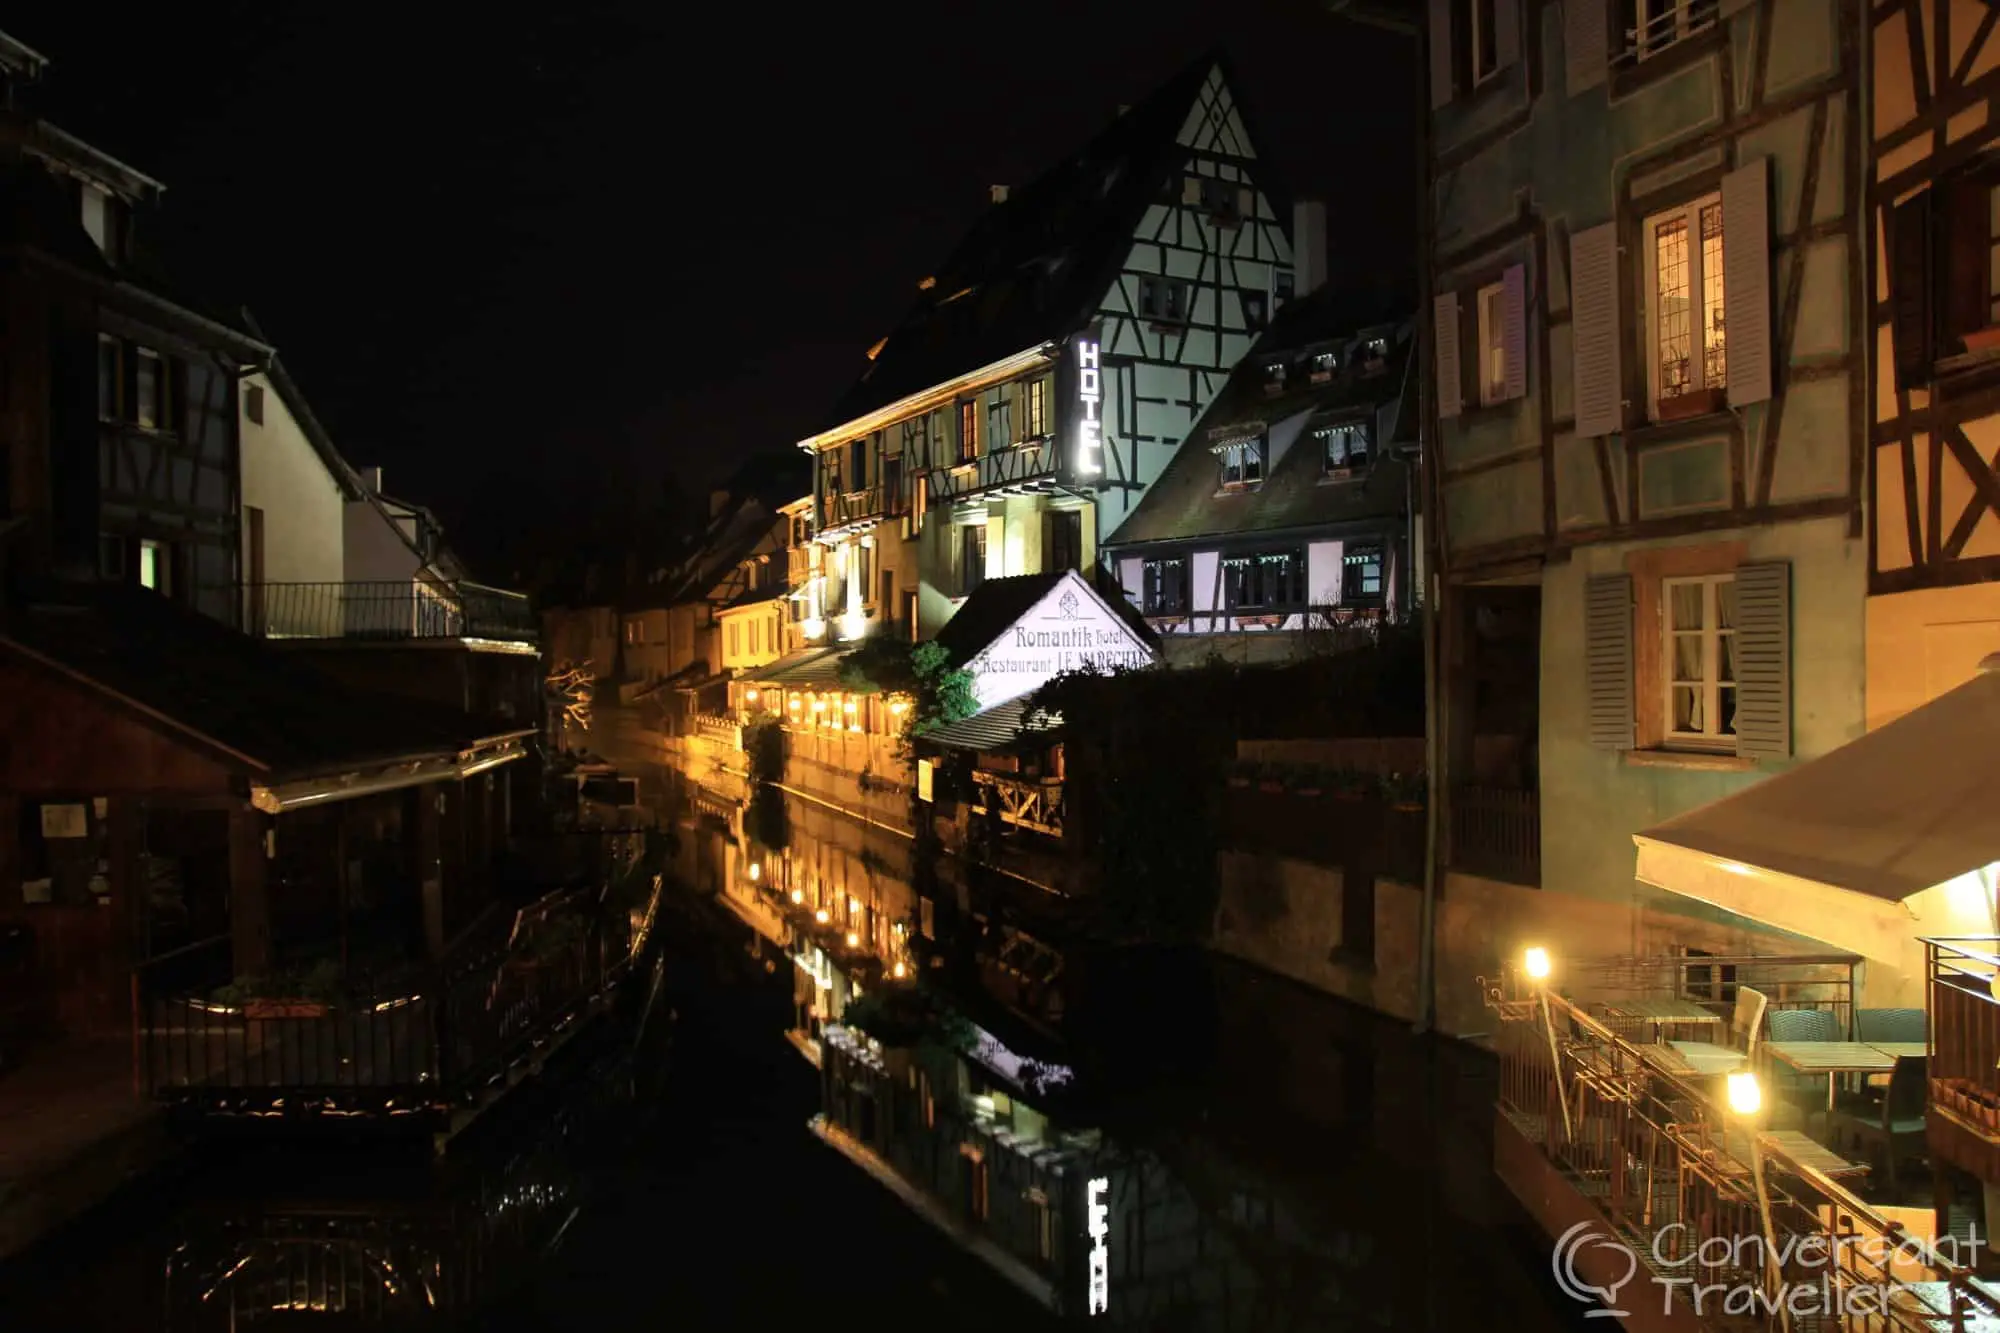 Arriving at night in Petite Venise, Colmar